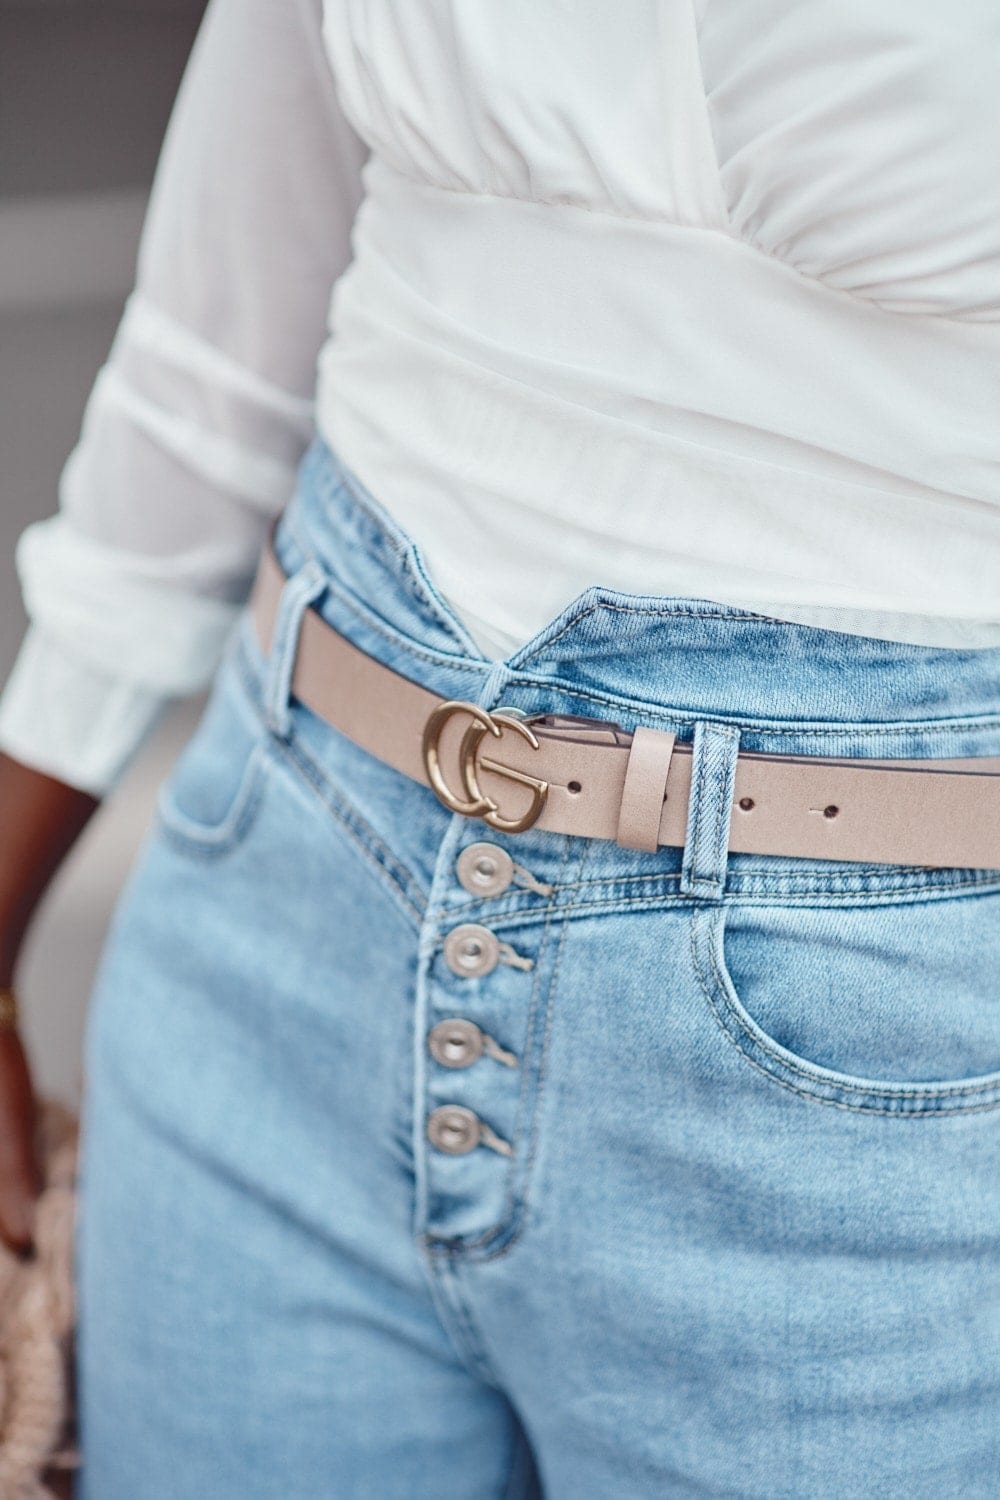 Leather belt with gold buckle of beige color